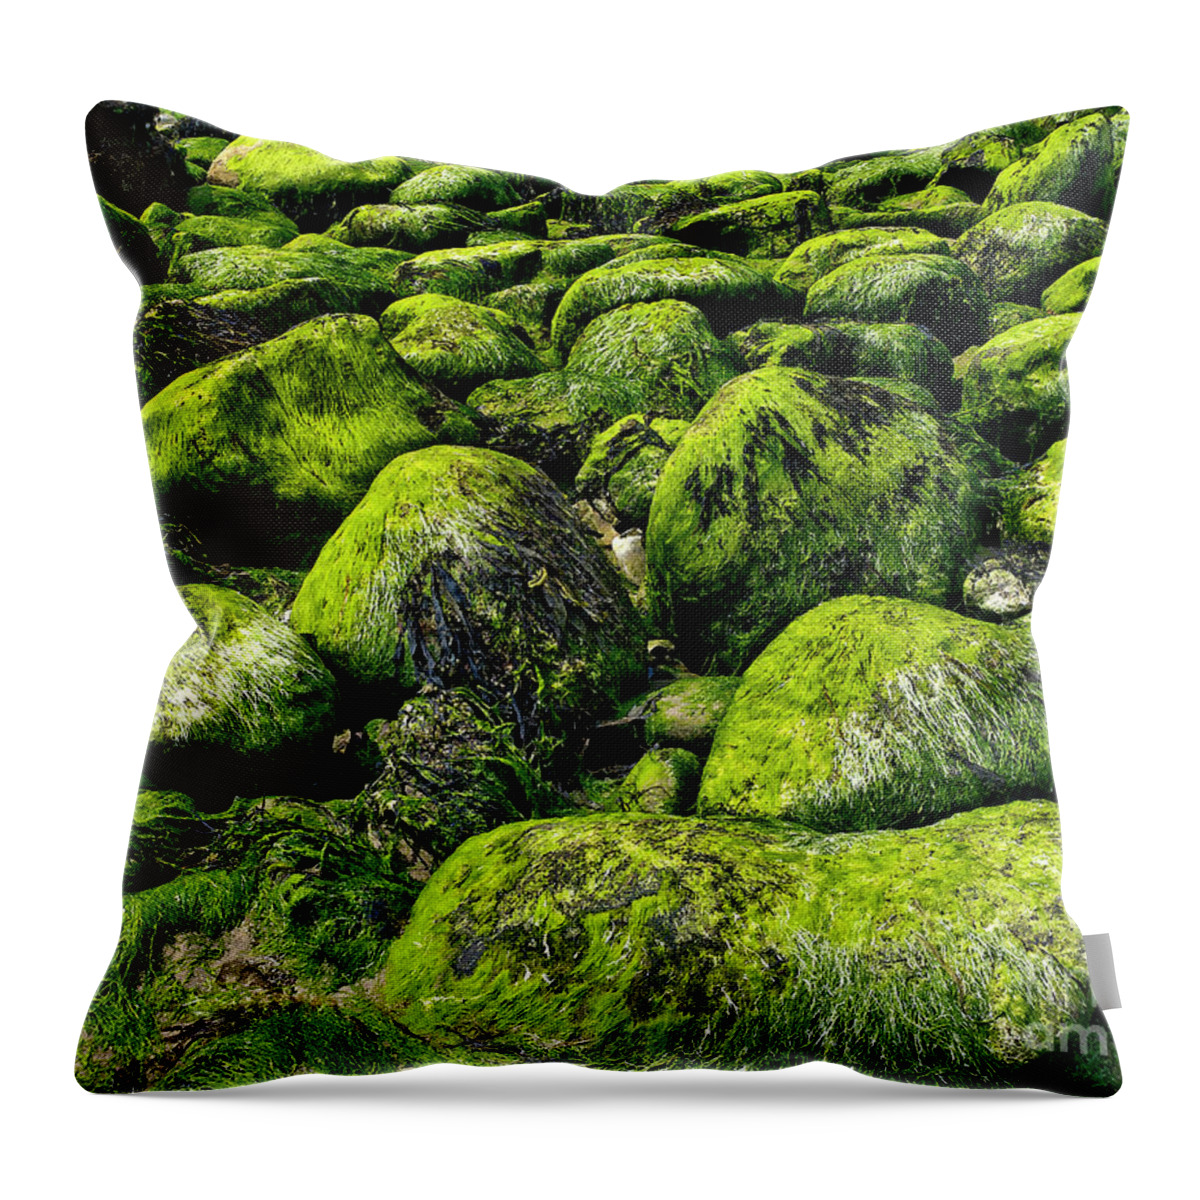 Mossy Bold Heads Boulders Stones Vivid Bright Vibrant Sunny Intimate Landscape Wonderland Delightful Beautiful Atmospheric Poetic Jolly Happy Impressive Fantastic Green Yellow Colorful Shapes Painterly Nature Wonder Singular Summer Day Shining Glossy Mysterious Slippery Majestic Glorious Magical Uk Numerous Uplifting Airily Scenic Moss Impressions Pleasing Serenity Serene Tranquil Unspoiled Charming Aesthetic Attractive Picturesque Spectacular Splendid Coastal Inspirational Untroubled Unwinding Throw Pillow featuring the photograph Mossy Bold Heads by Tatiana Bogracheva